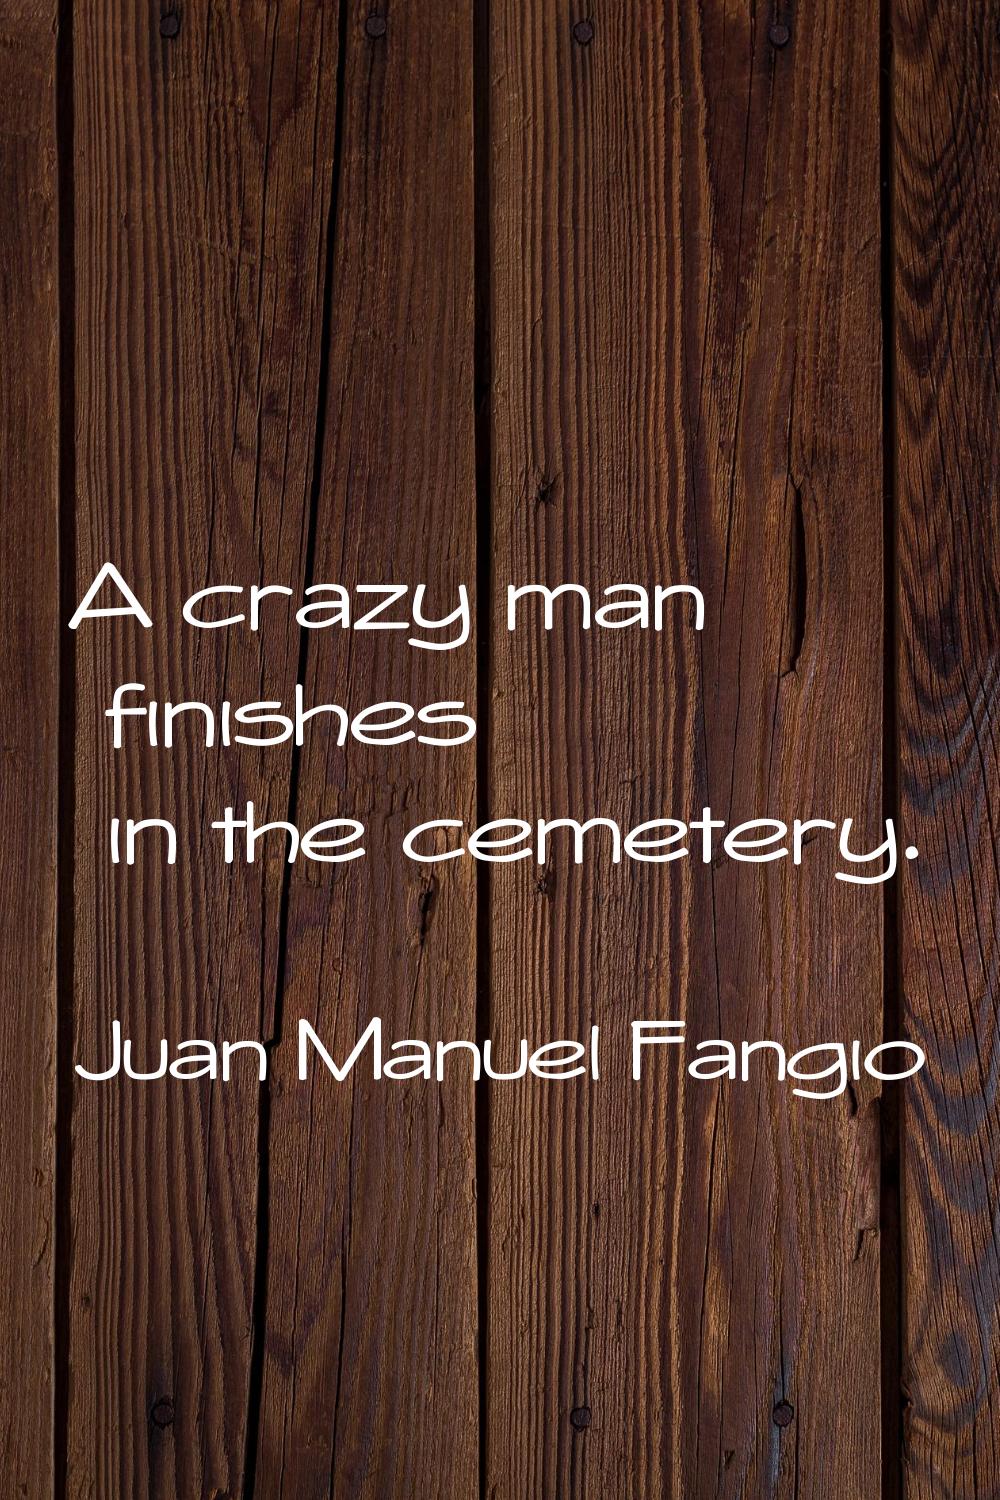 A crazy man finishes in the cemetery.